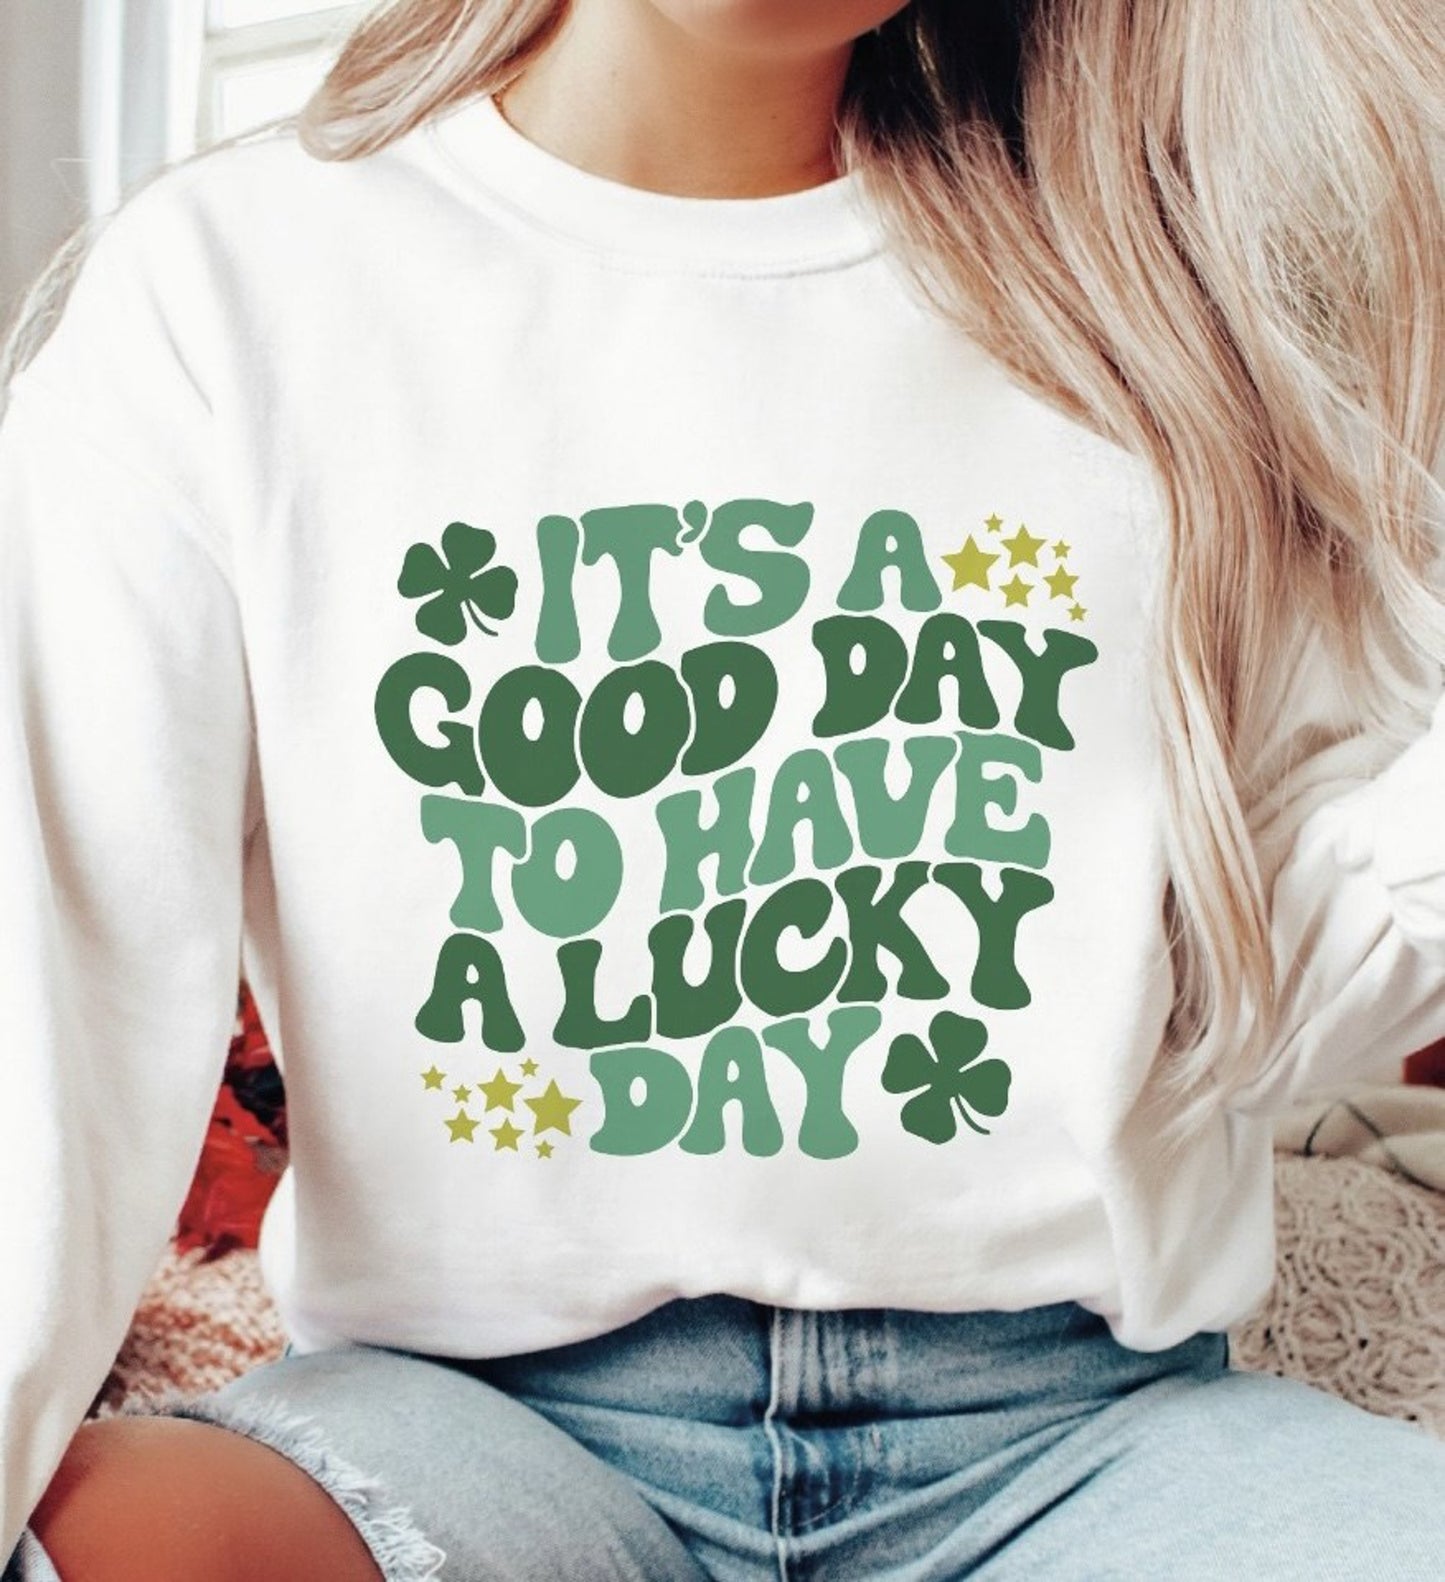 It's A Good Day To Have A Lucky Day Crew Sweatshirt